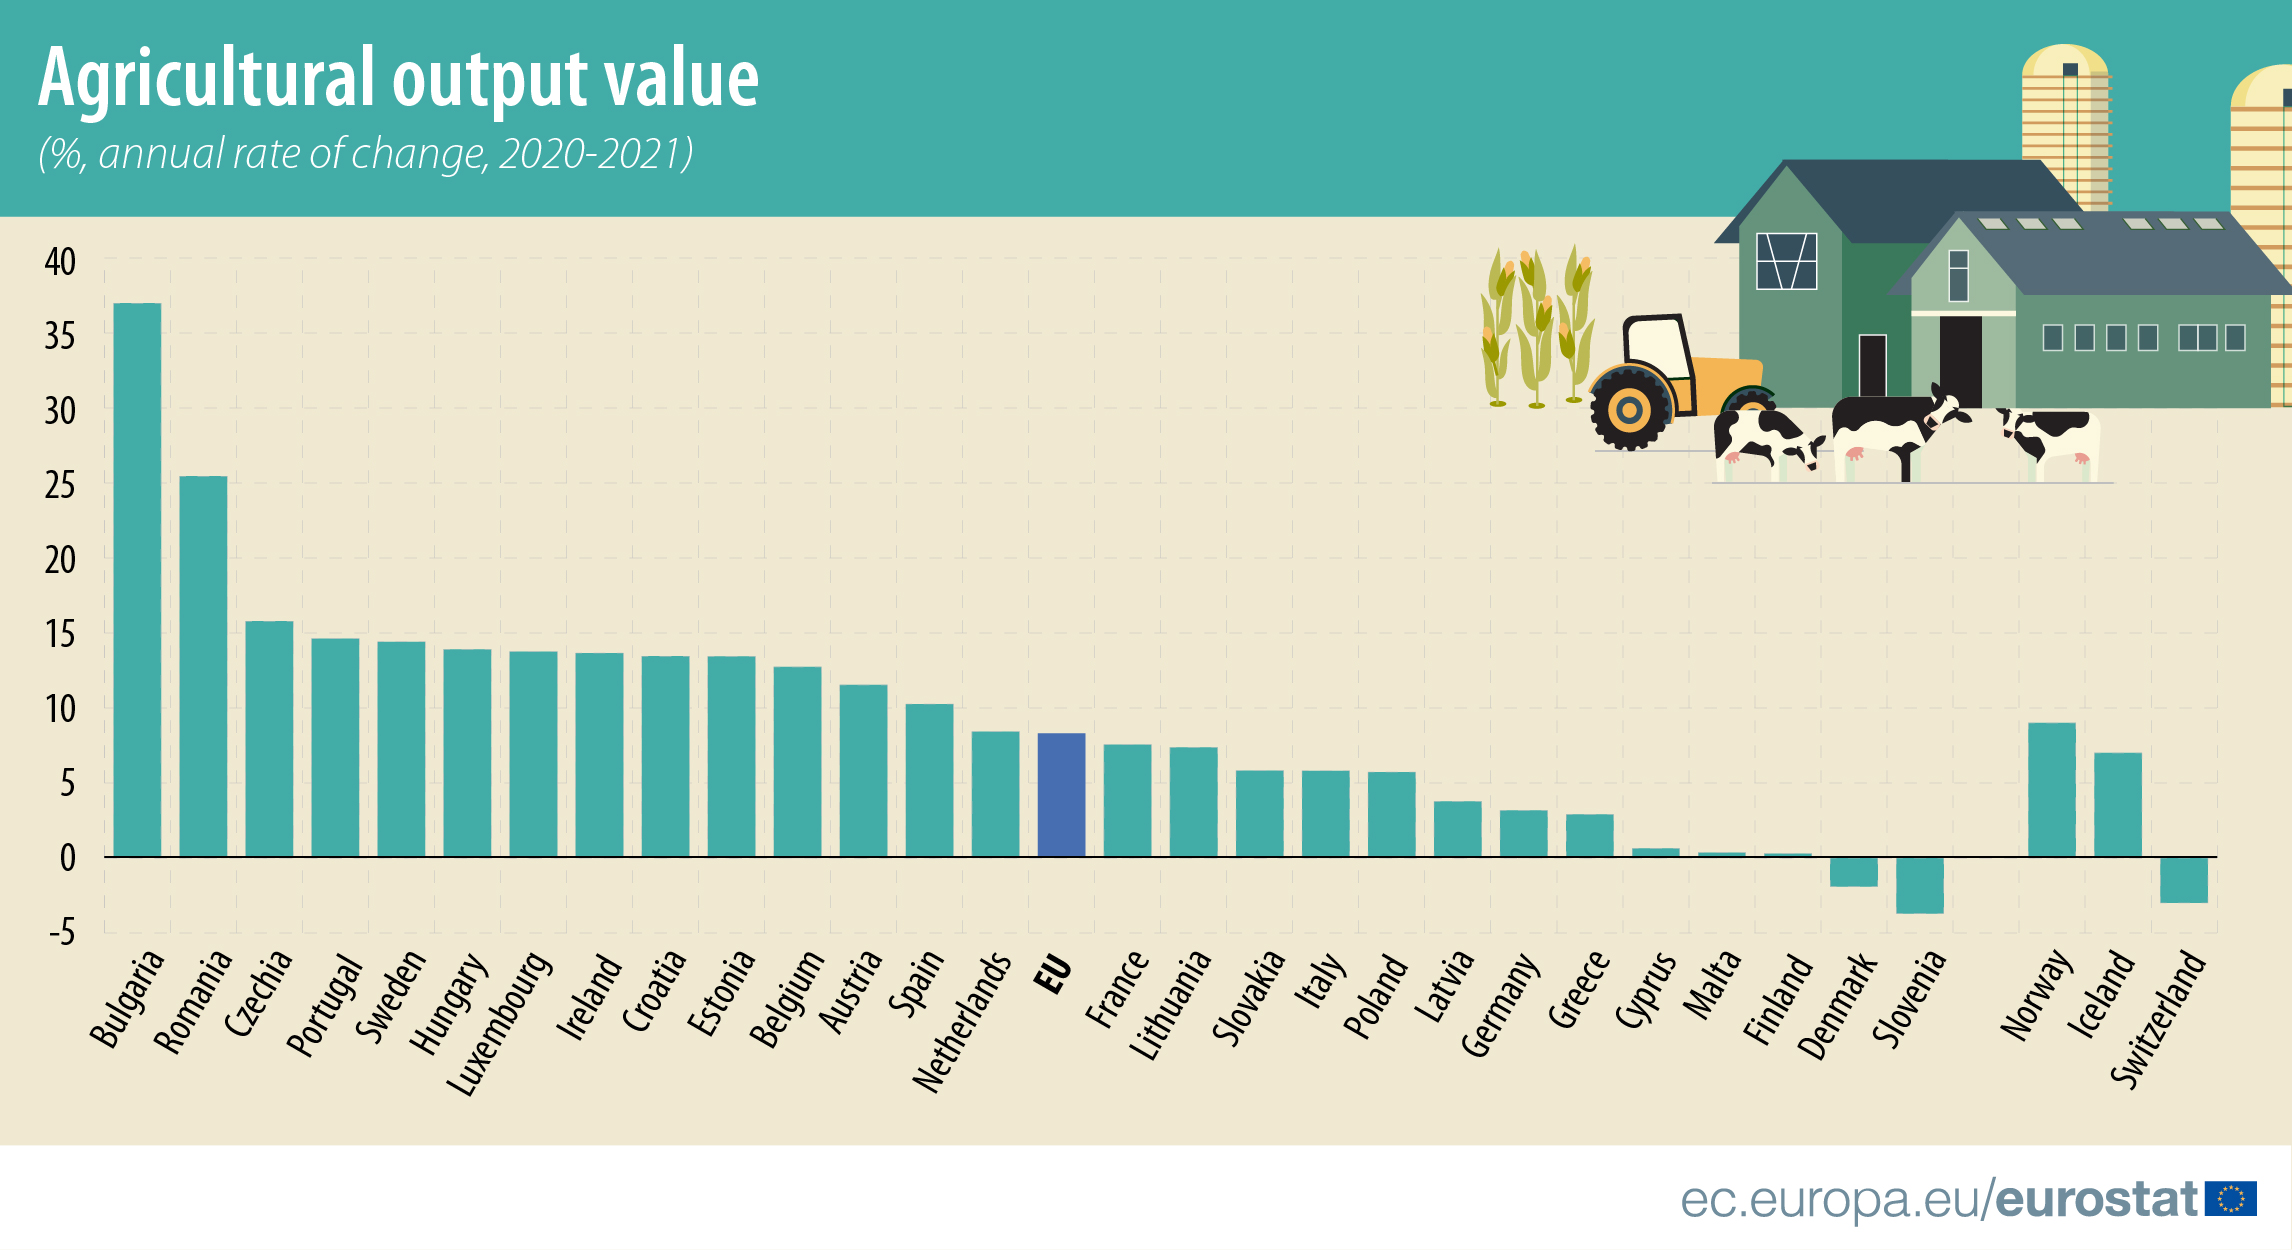  Bar graph: Agricultural output value, in %, annual rate of change between 2020 and 2021, in the EU Member States and EFTA countries 